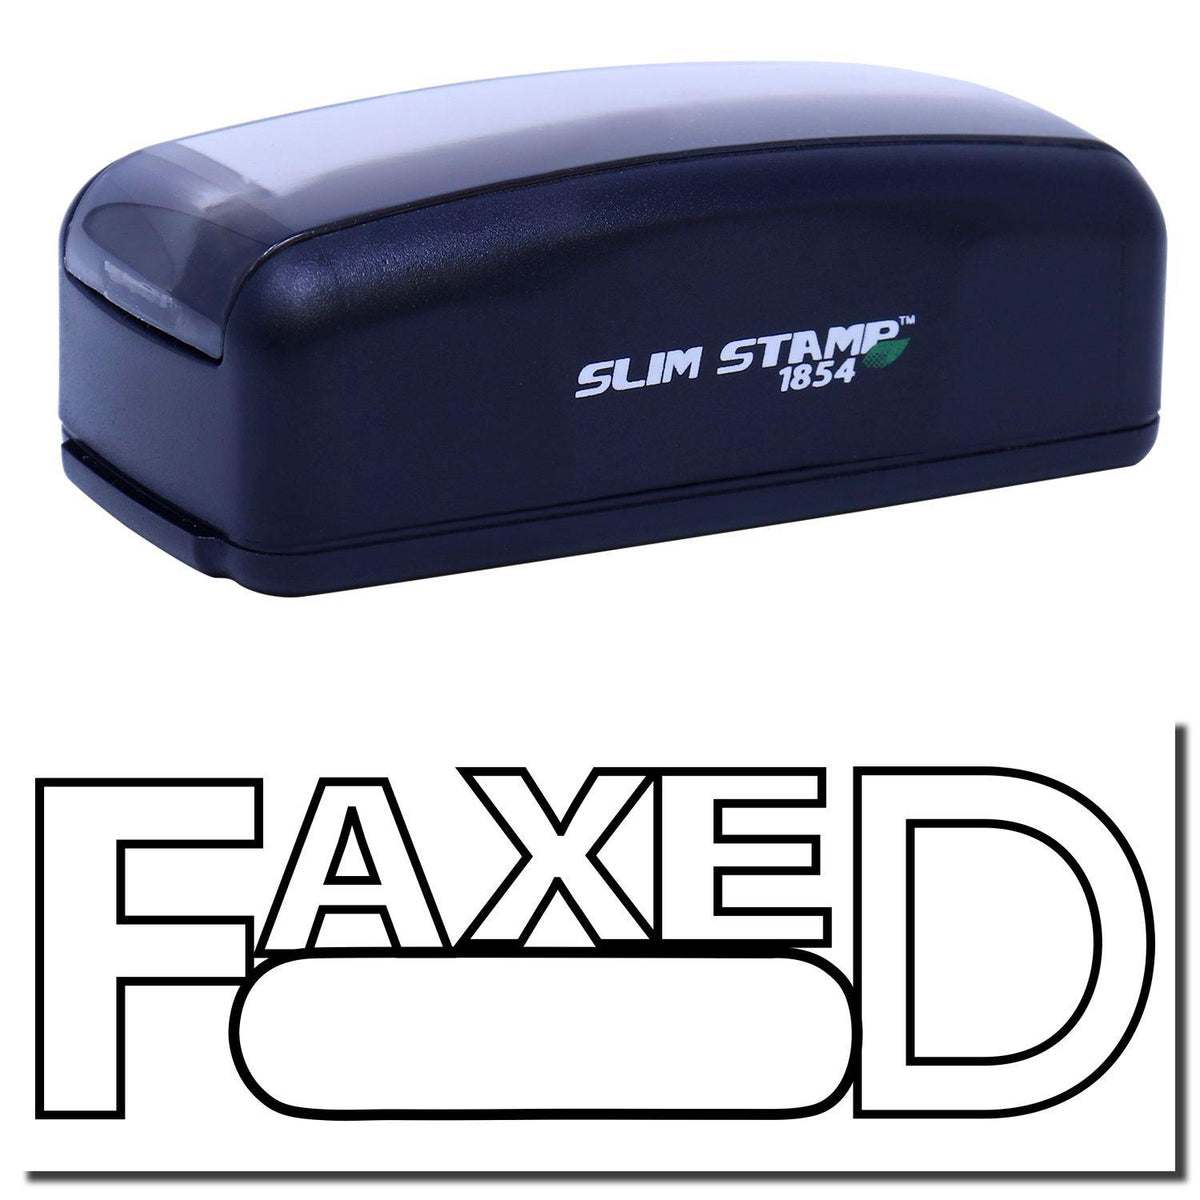 A large pre-inked stamp with a stamped image showing how the text &quot;FAXED&quot; in an outline font with a round date box is displayed after stamping.